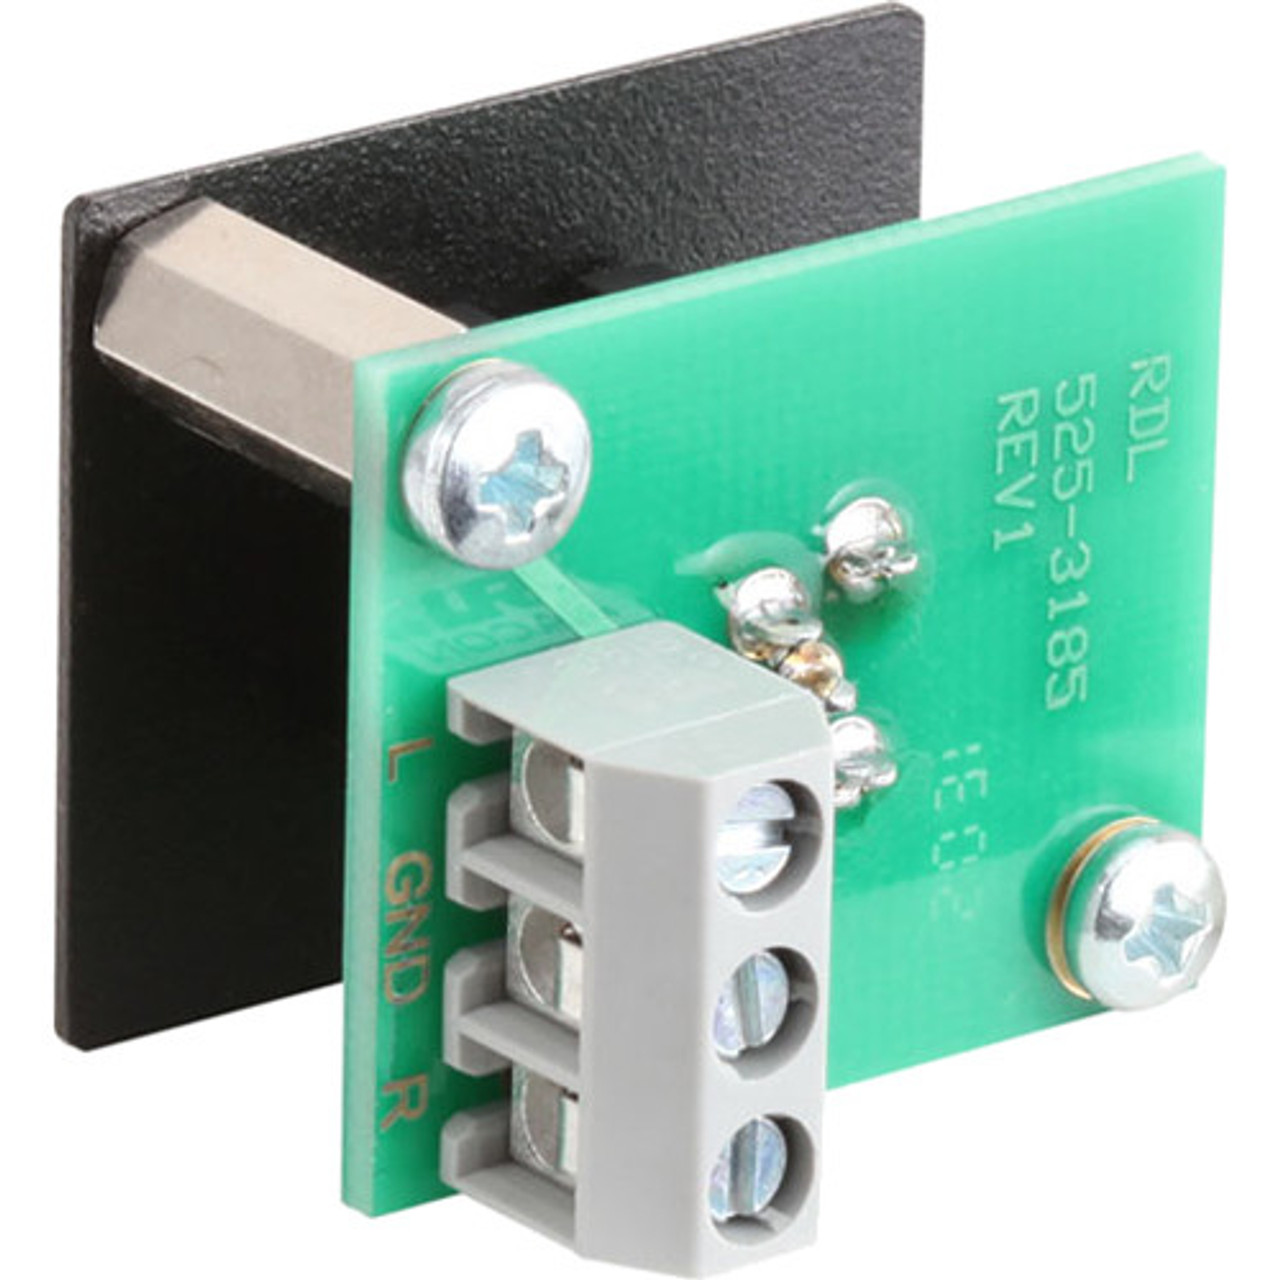 RDL AMS-1/8F 1/8" Stereo Mini-Jack Terminal Block Connections (AMS-1/8F)